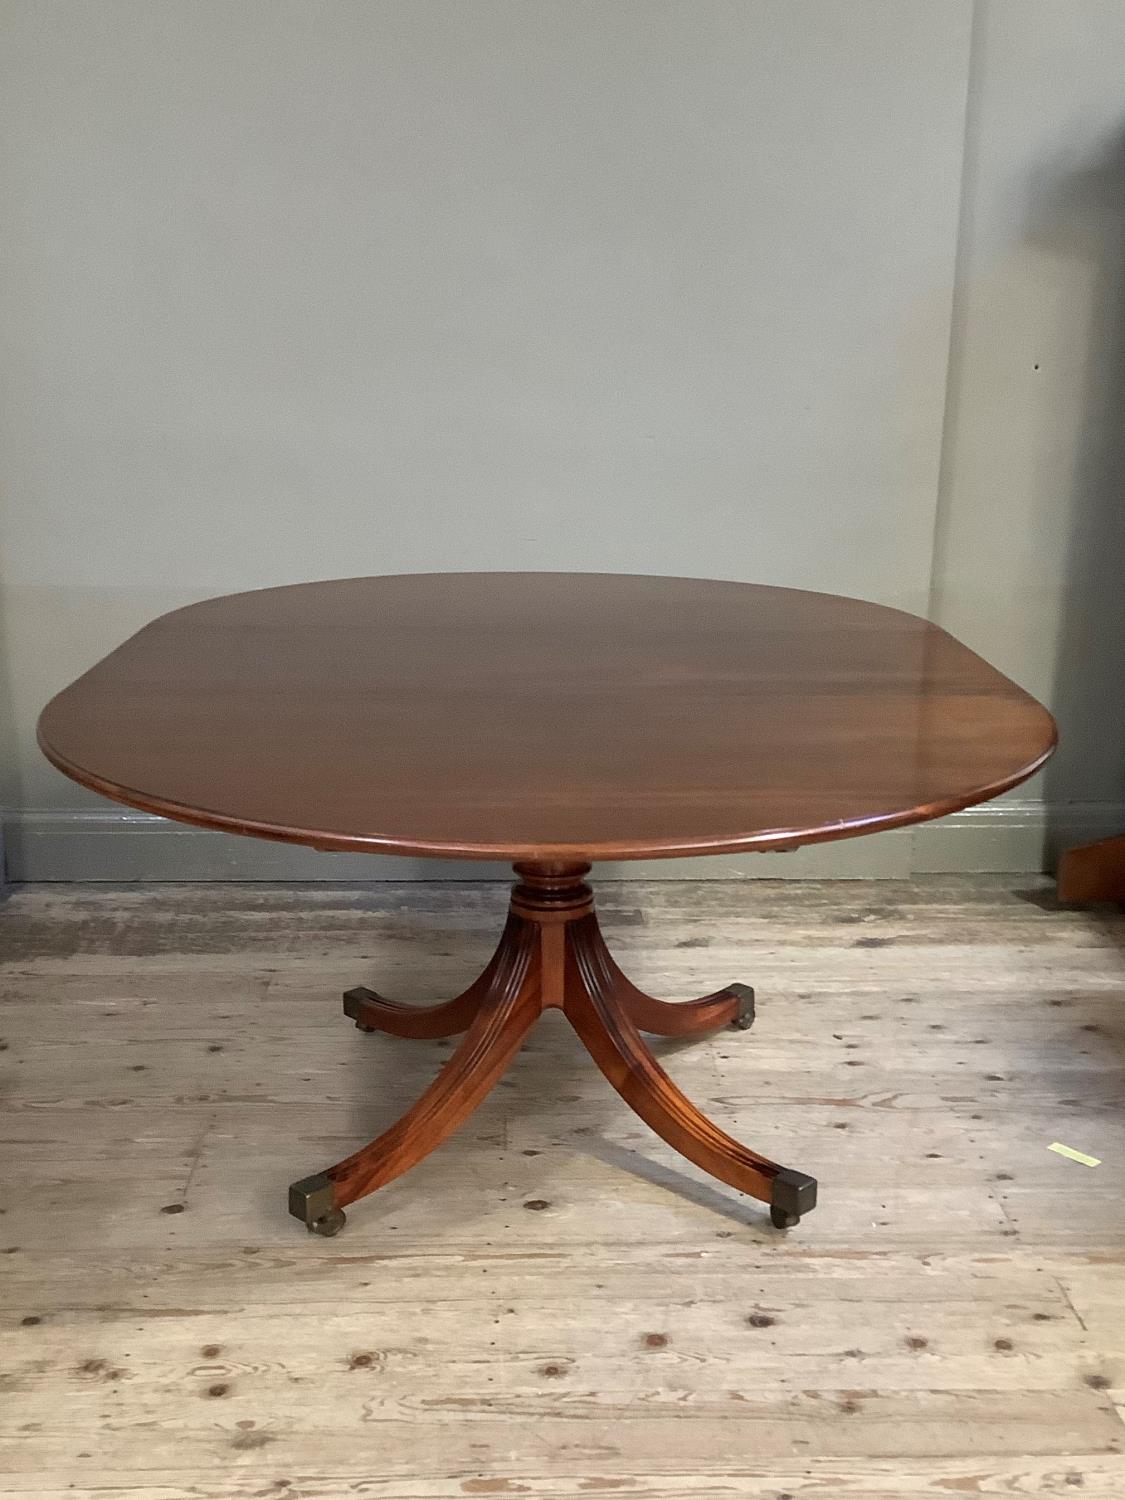 A reproduction mahogany Regency style dining table, the oval top above a gun barrel column and